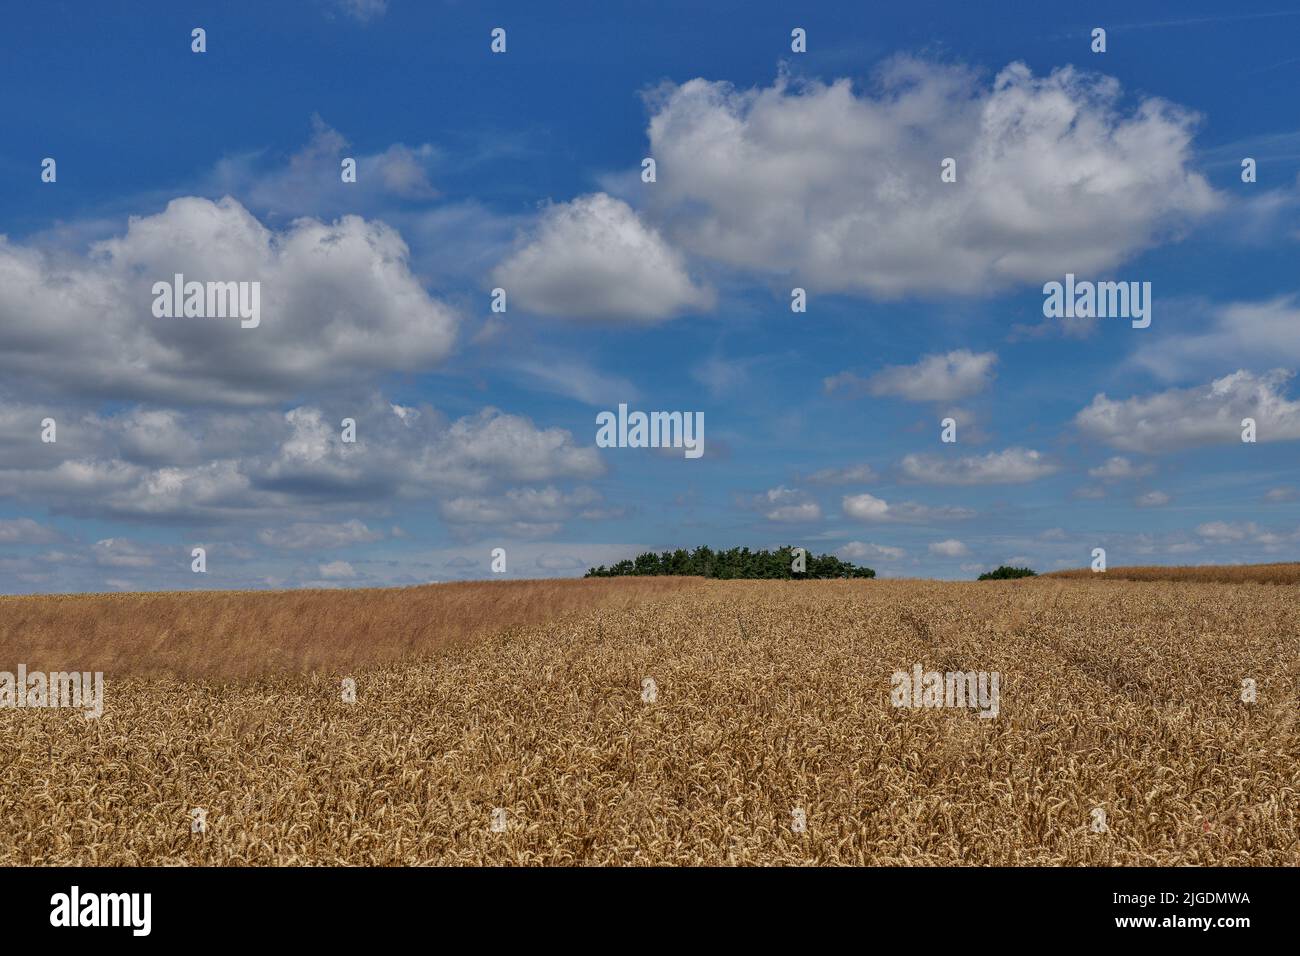 Picturesque clouds in the sunny summer sky above the fields of ripe cereals Lower Silesia Poland Stock Photo